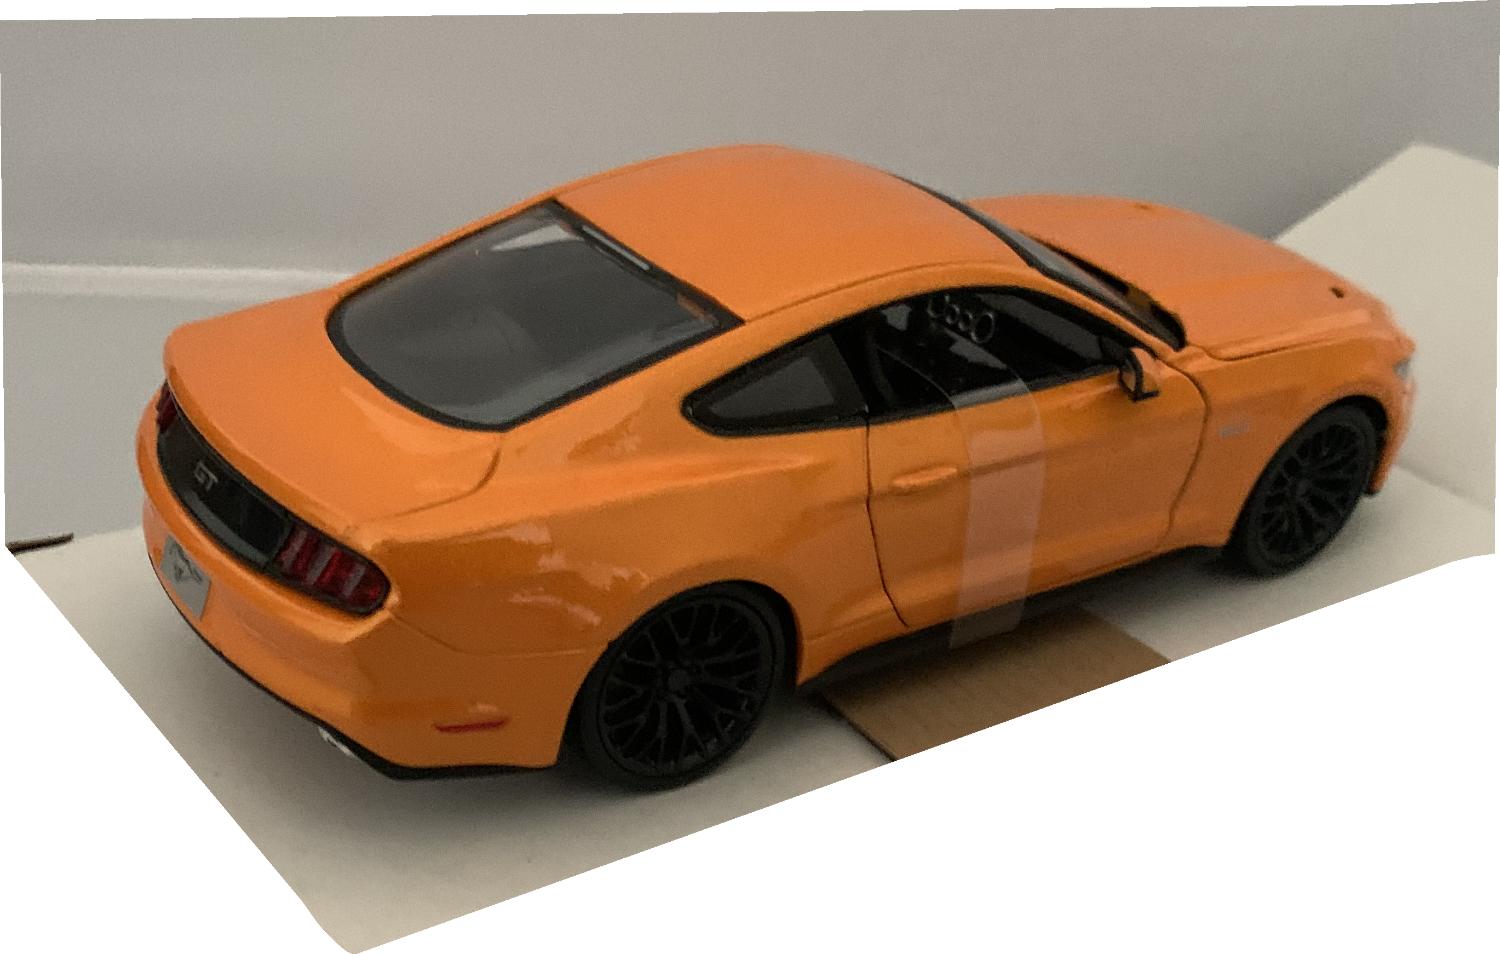 Ford Mustang GT with detail throughout, all authentically recreated. The model is presented in a window display box, the car is approx. 19.5 cm long and the presentation box is 24 cm long